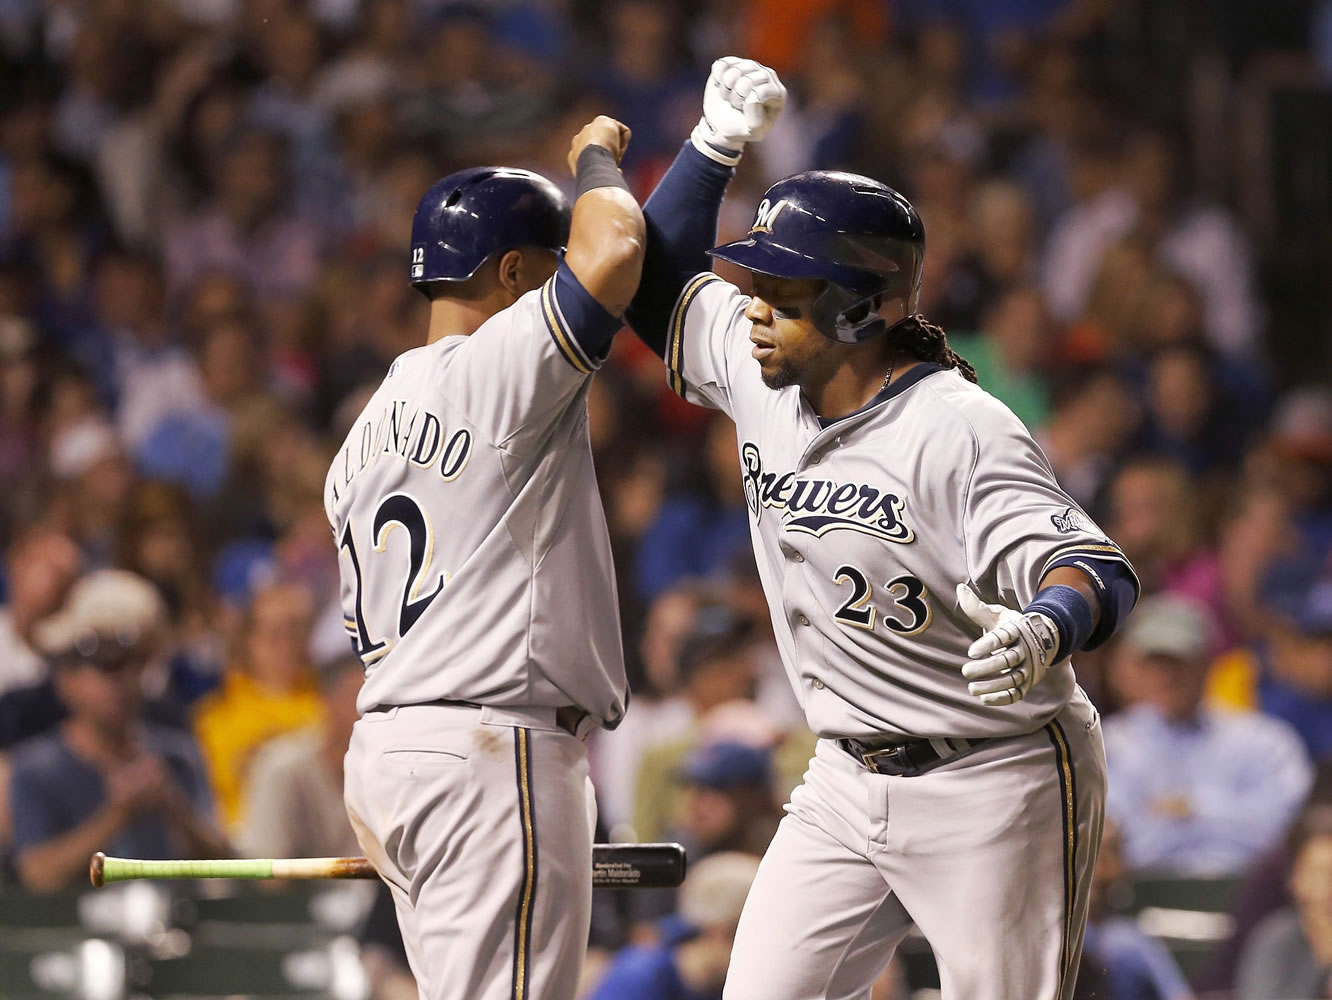 Rickie Weeks, right, and the Seattle Mariners have agreed to a $2 million, one-year contract, according to a person with knowledge of the negotiations.